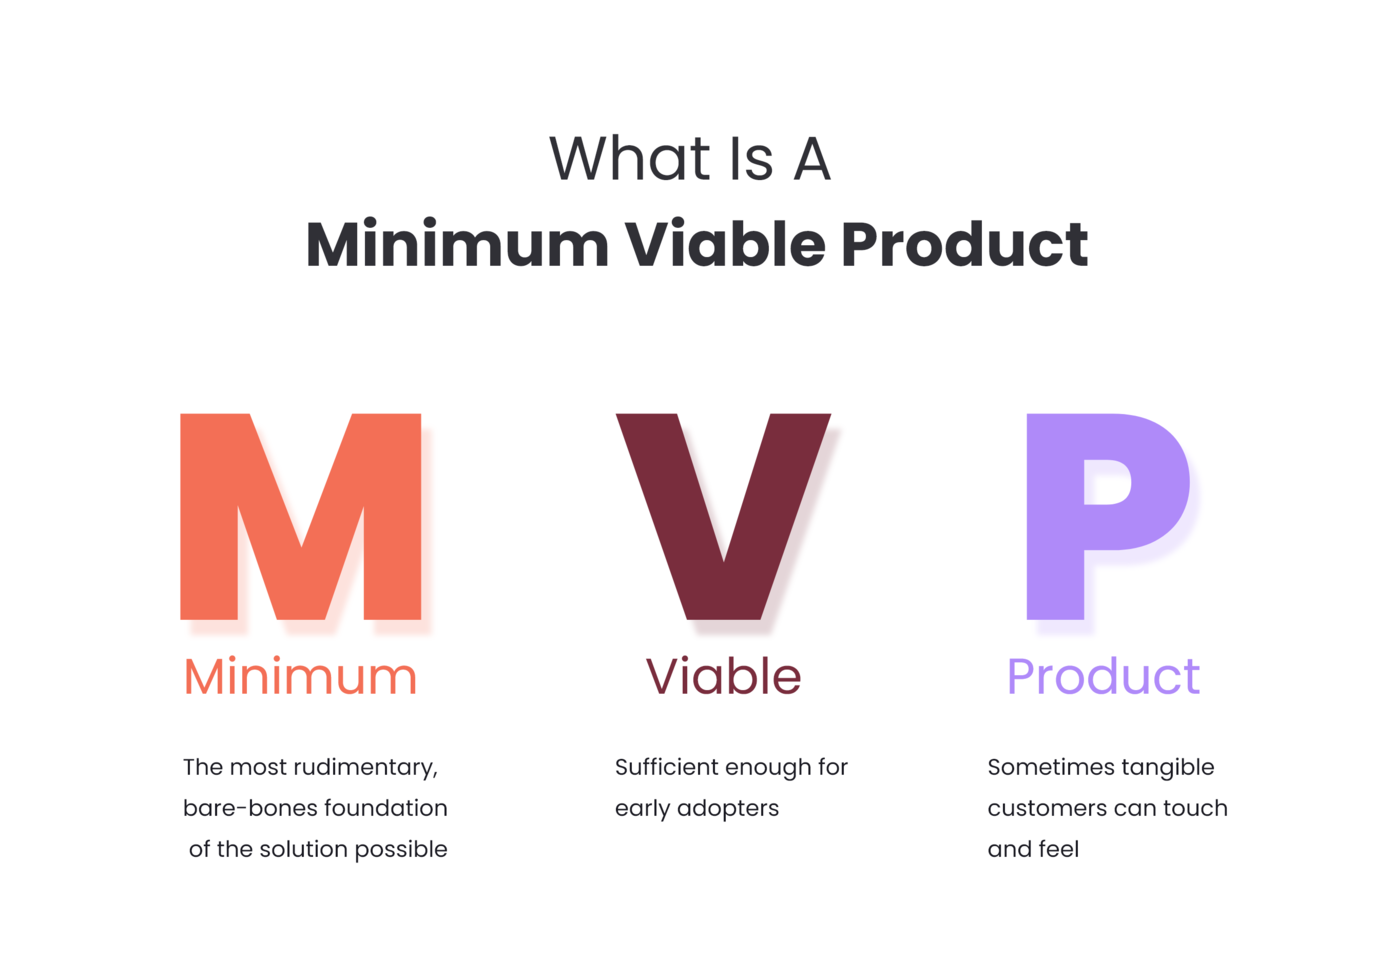 Minimum Viable Product - What Is it